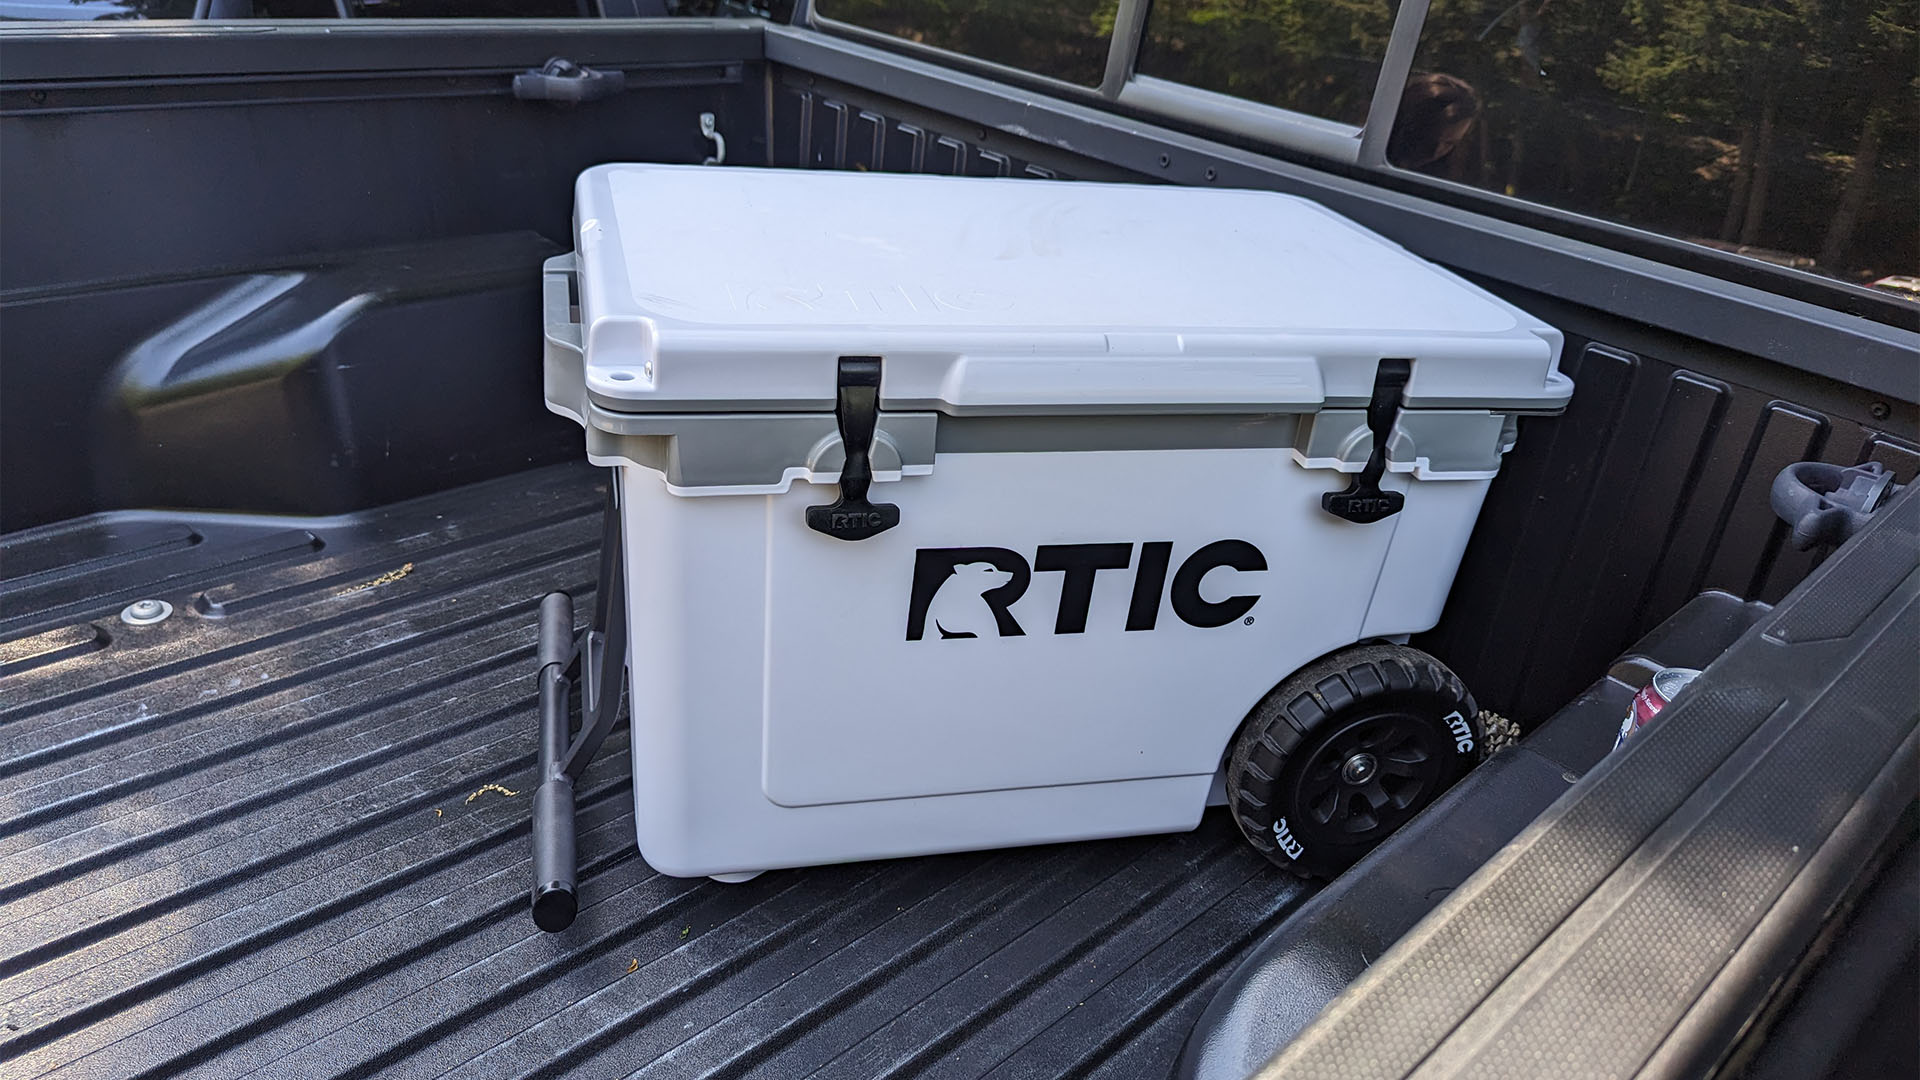 https://www.thedrive.com/uploads/2023/05/16/RTIC-Cooler-Tacoma-Bed-2-.jpg